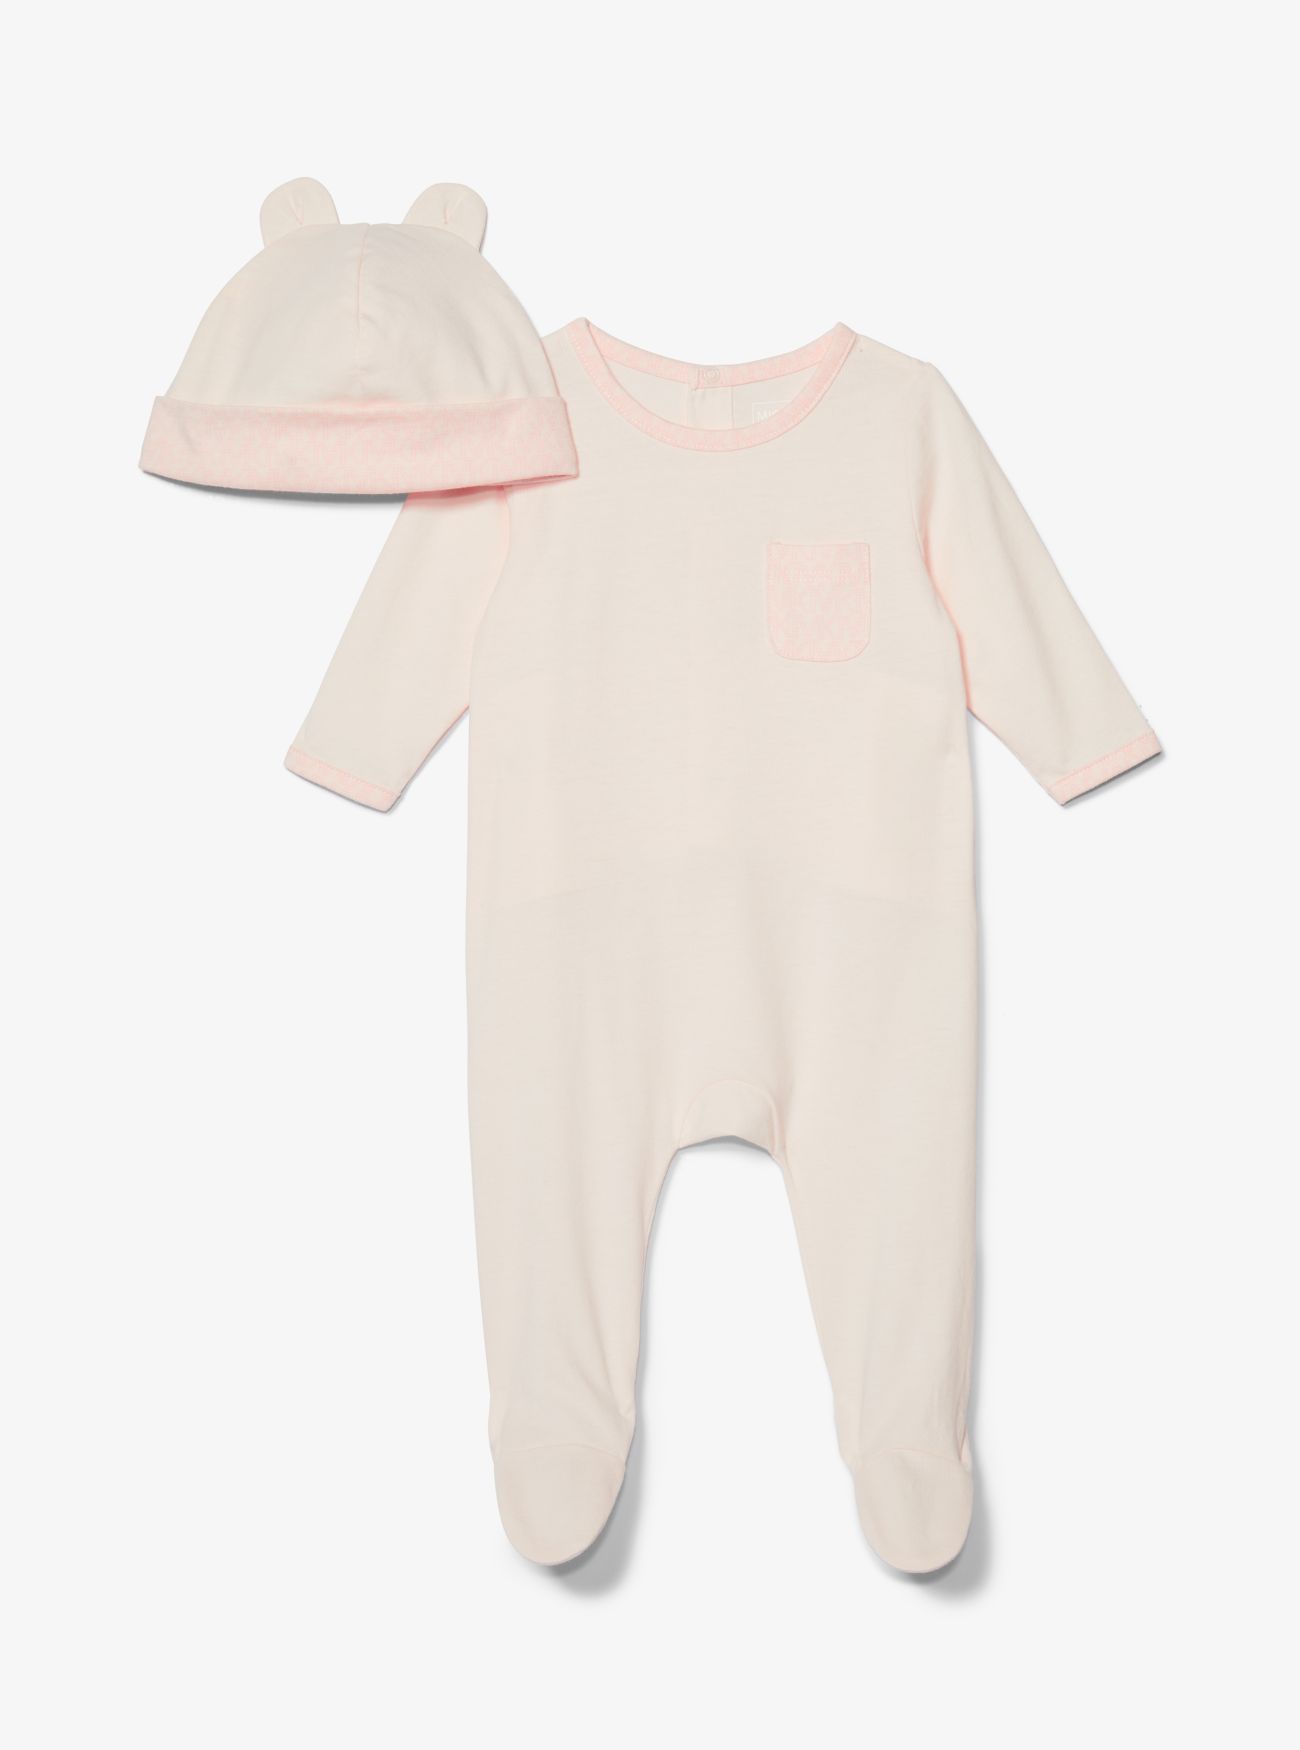 MK Cotton Onesie and Hat Baby Set - Pale Pink - Michael Kors